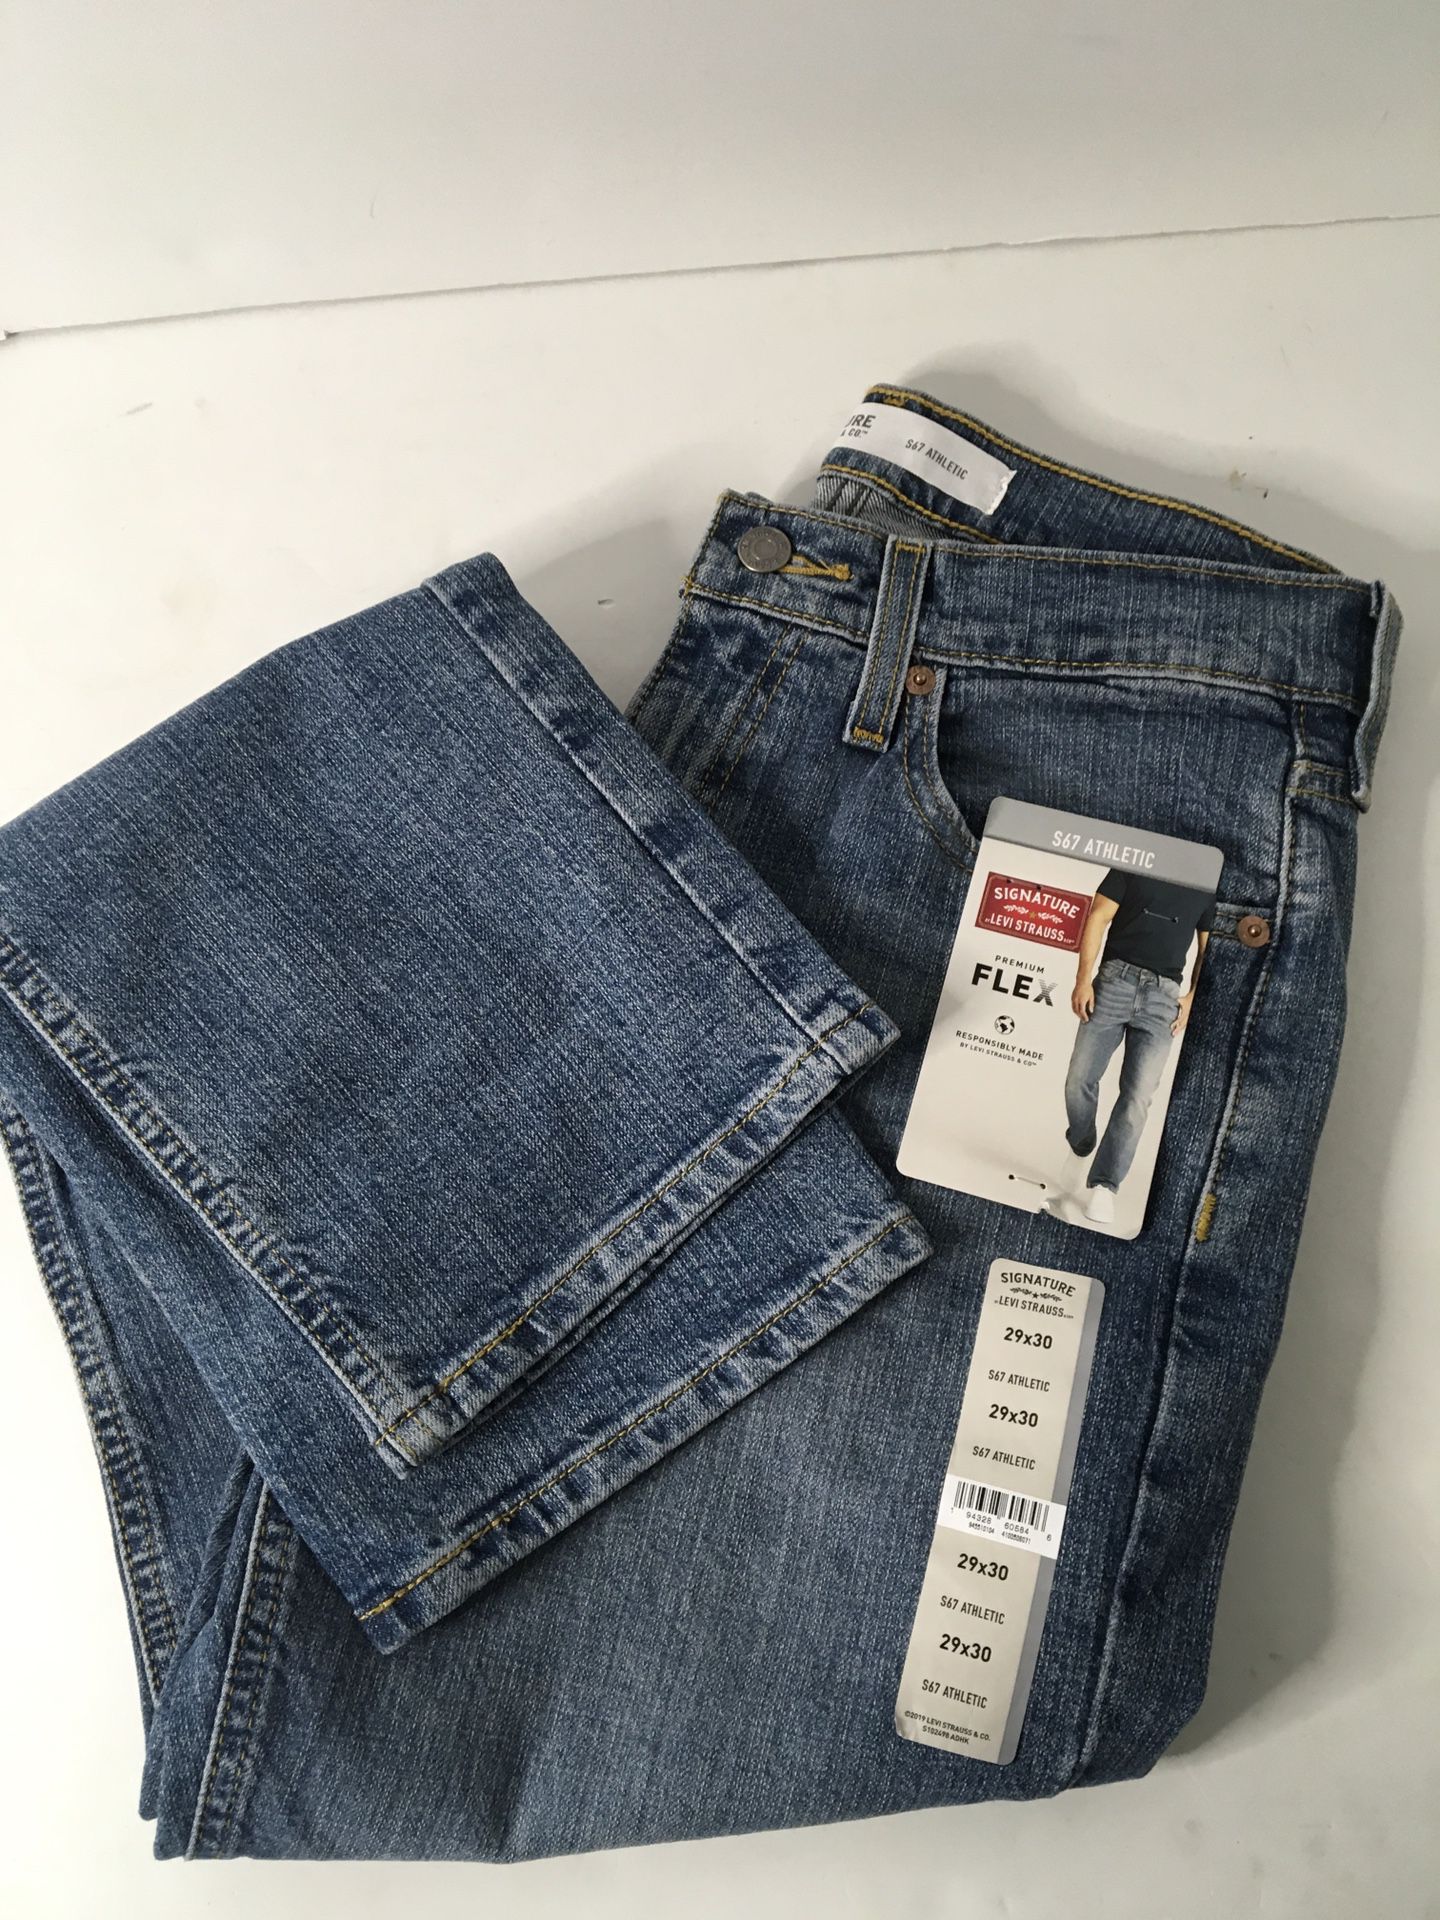 New Men's 29x30 Signature Levi Strauss Athletic Flex Fit Jeans for Sale in  La Marque, TX - OfferUp